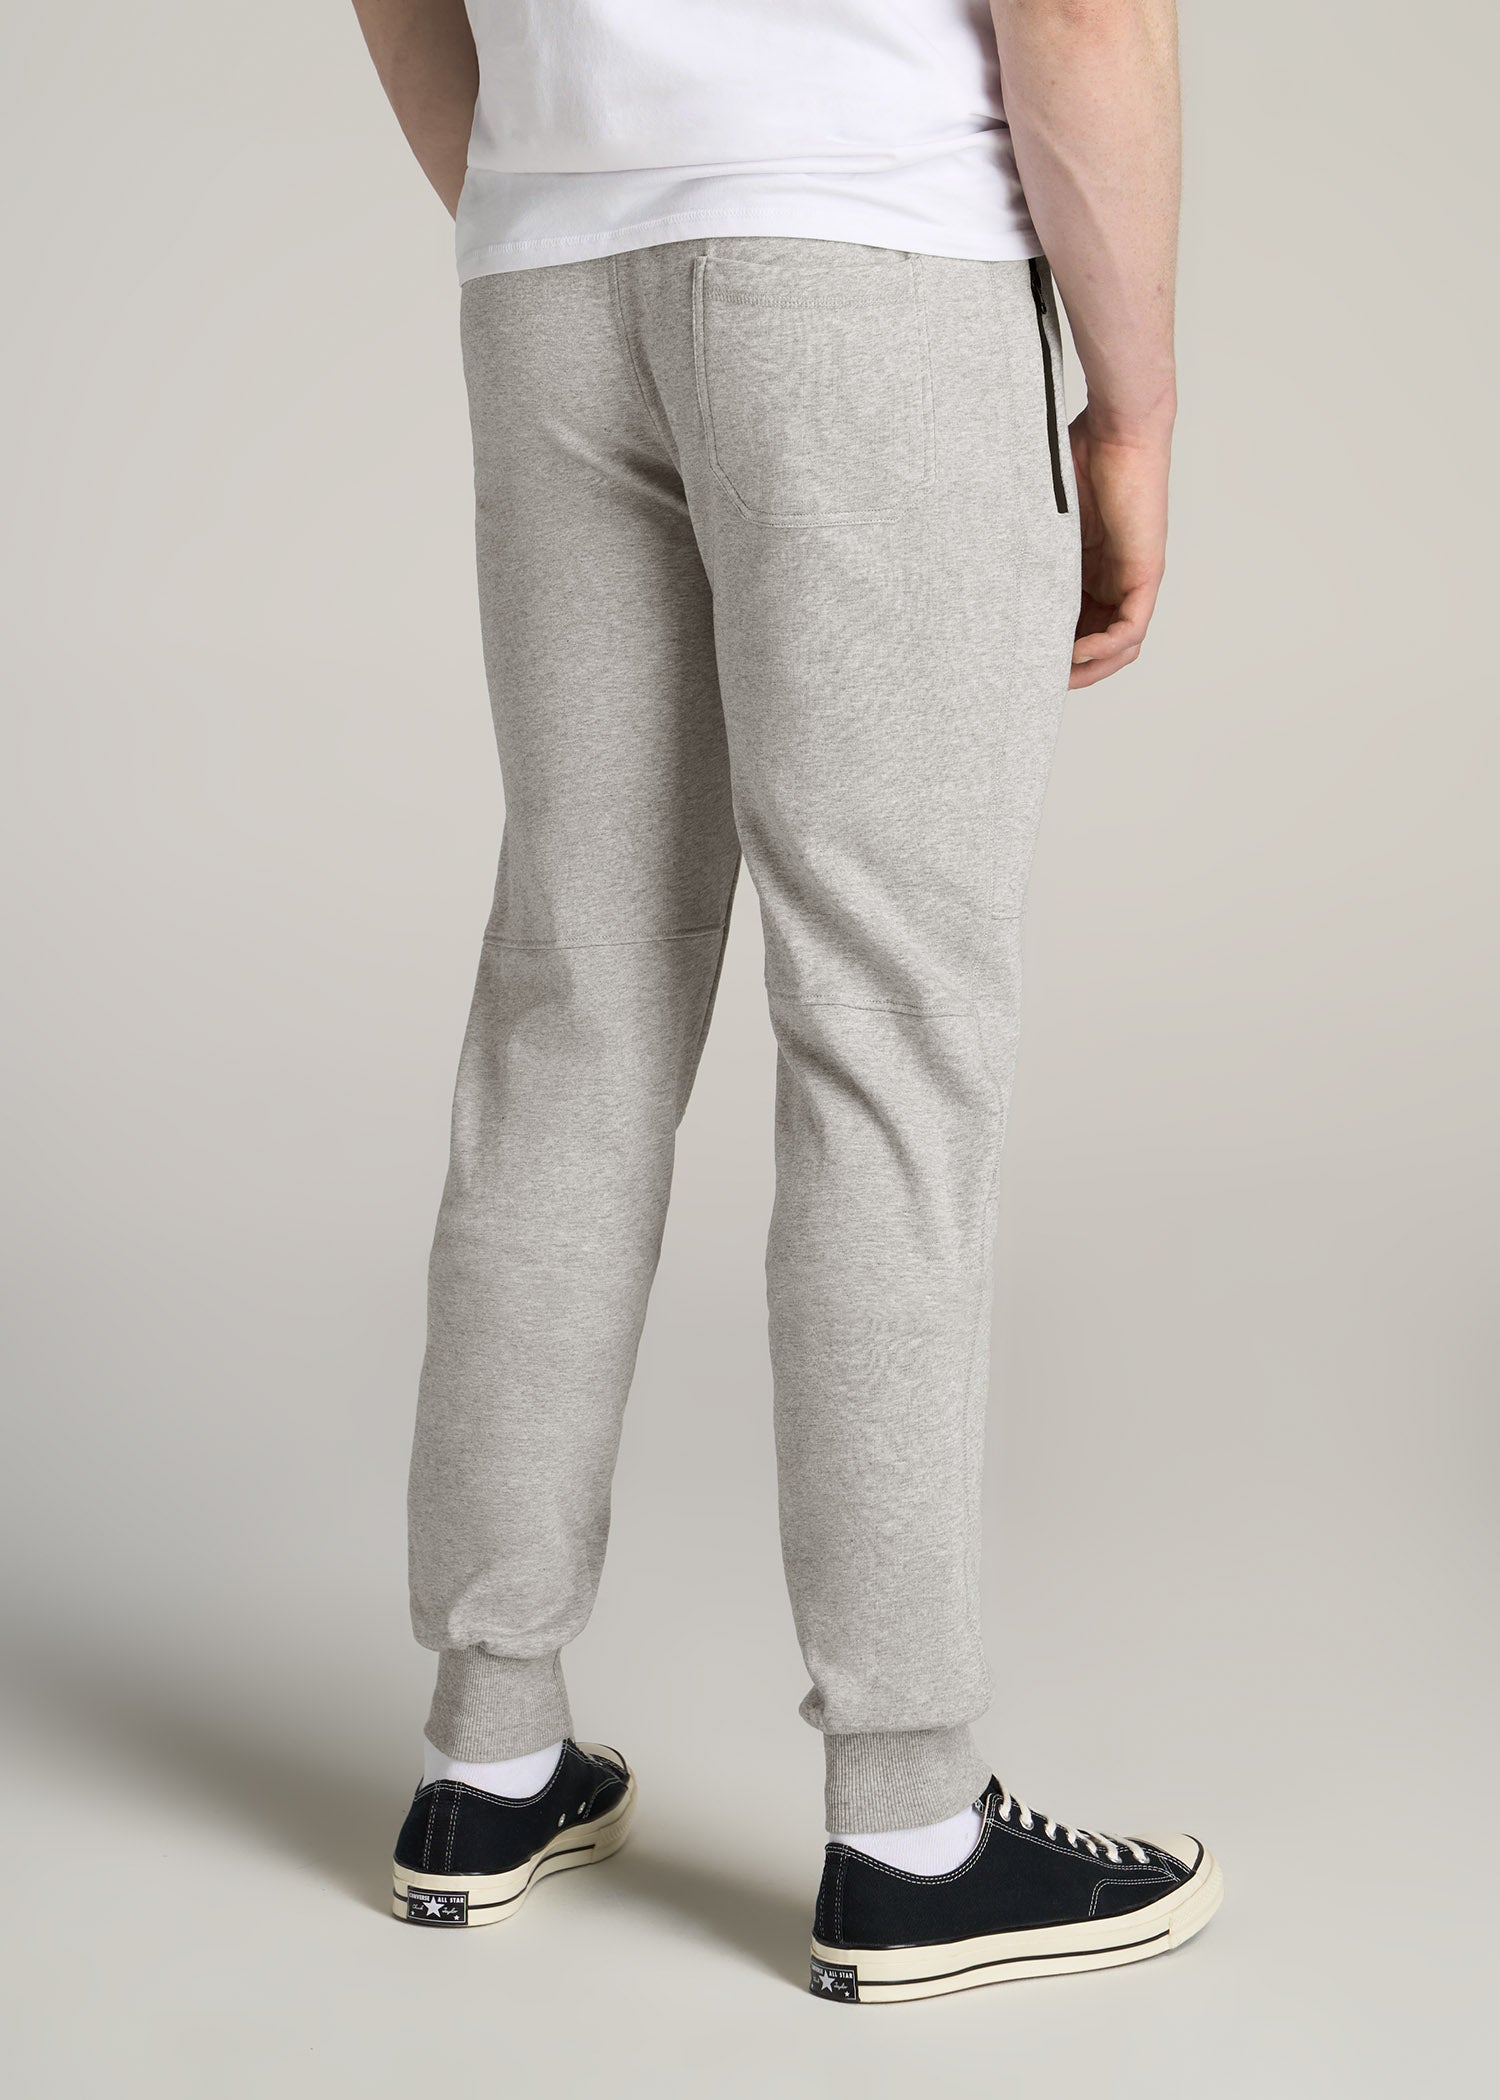 NEW YORKER TERRY JOGGER GREY – HIP AND BONE